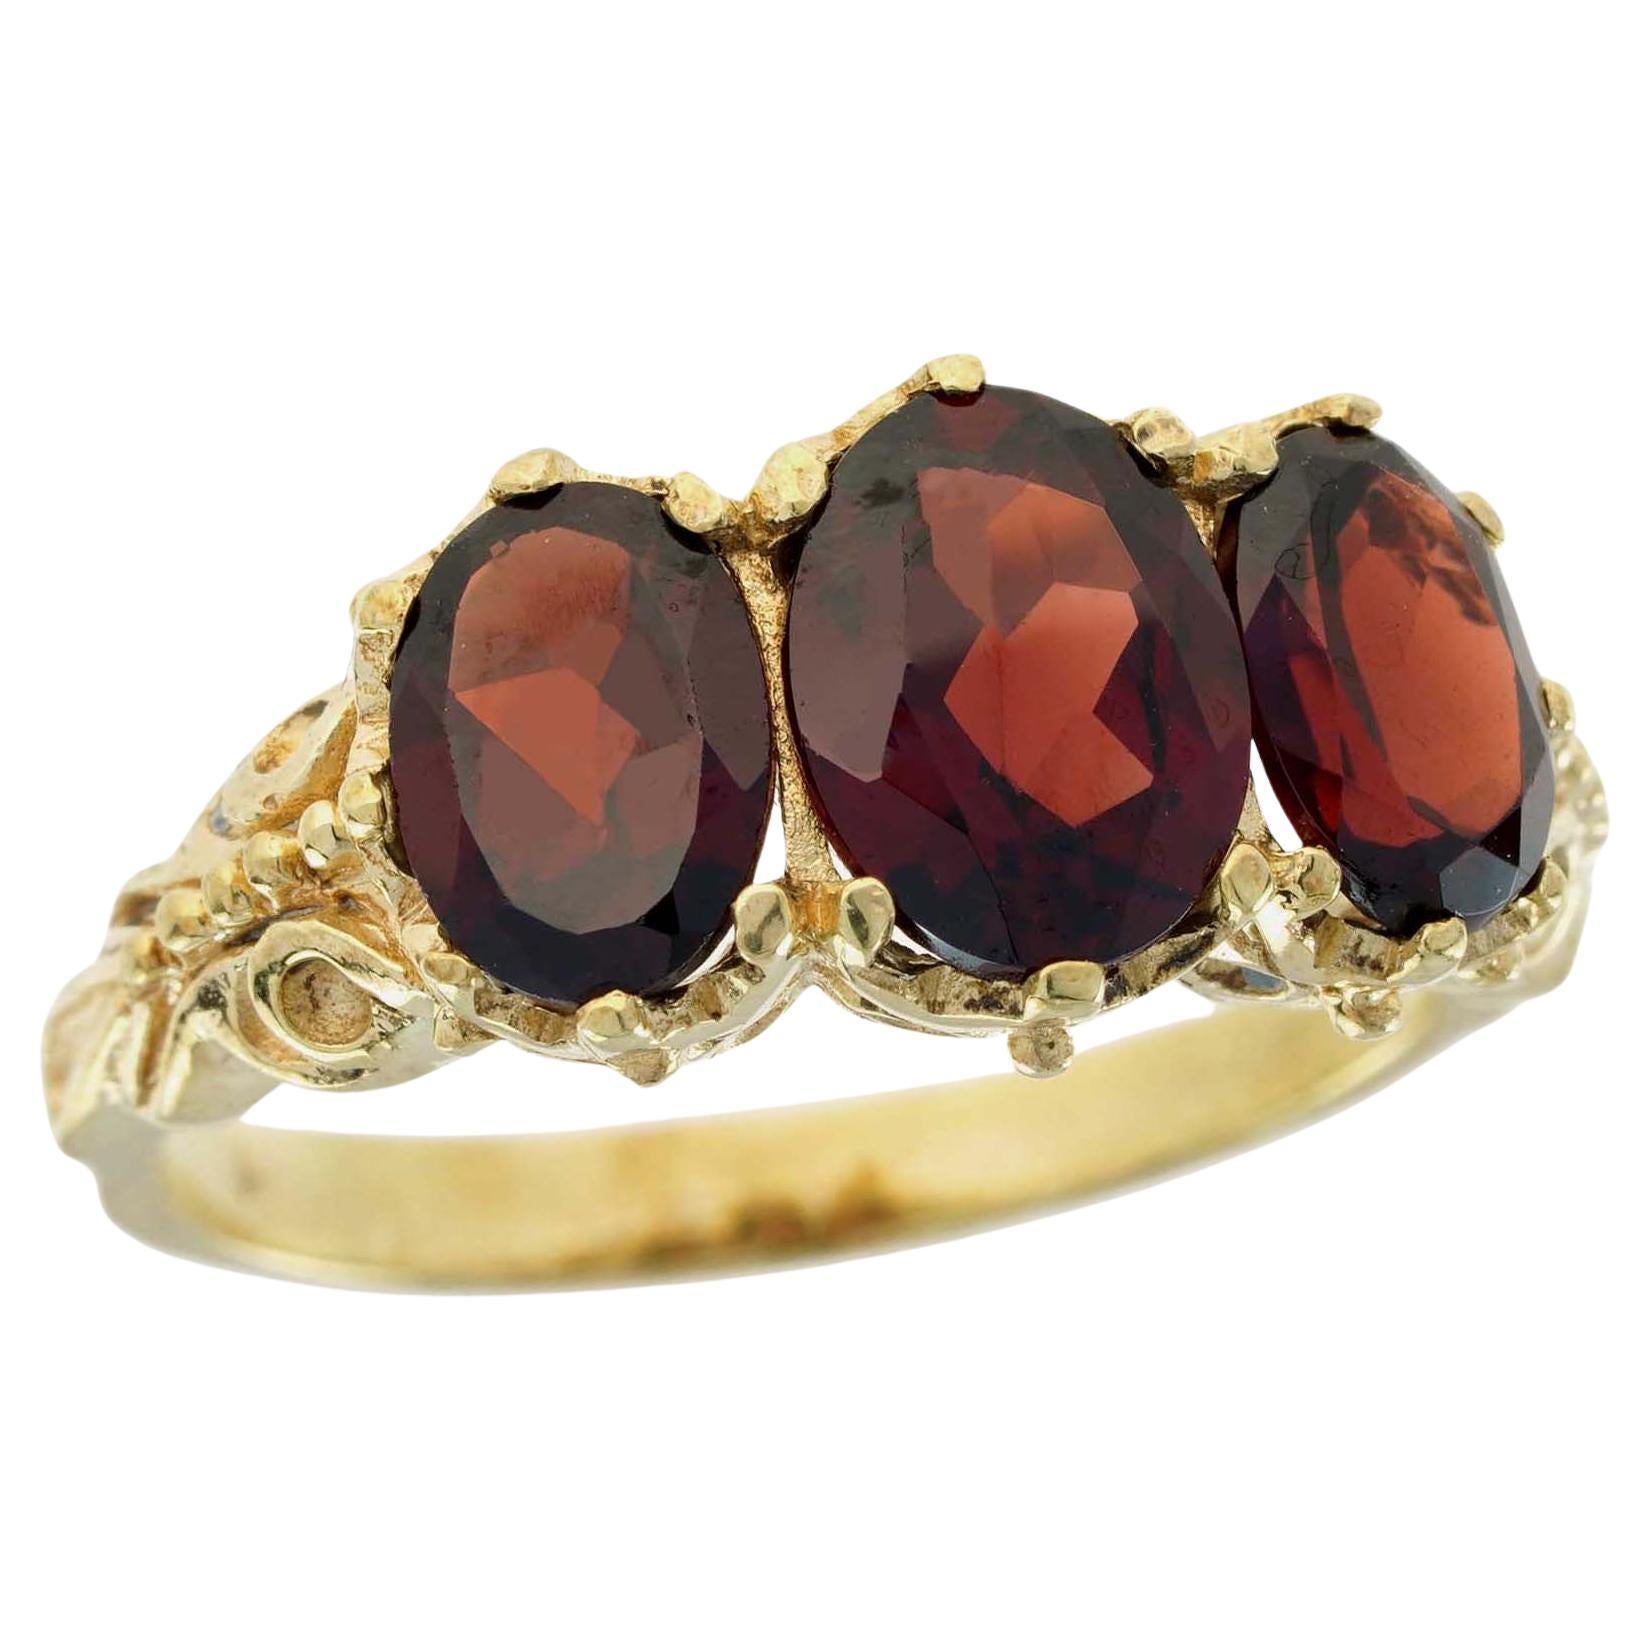 For Sale:  Natural Garnet Vintage Style Three Stone Ring in Solid 9K Gold